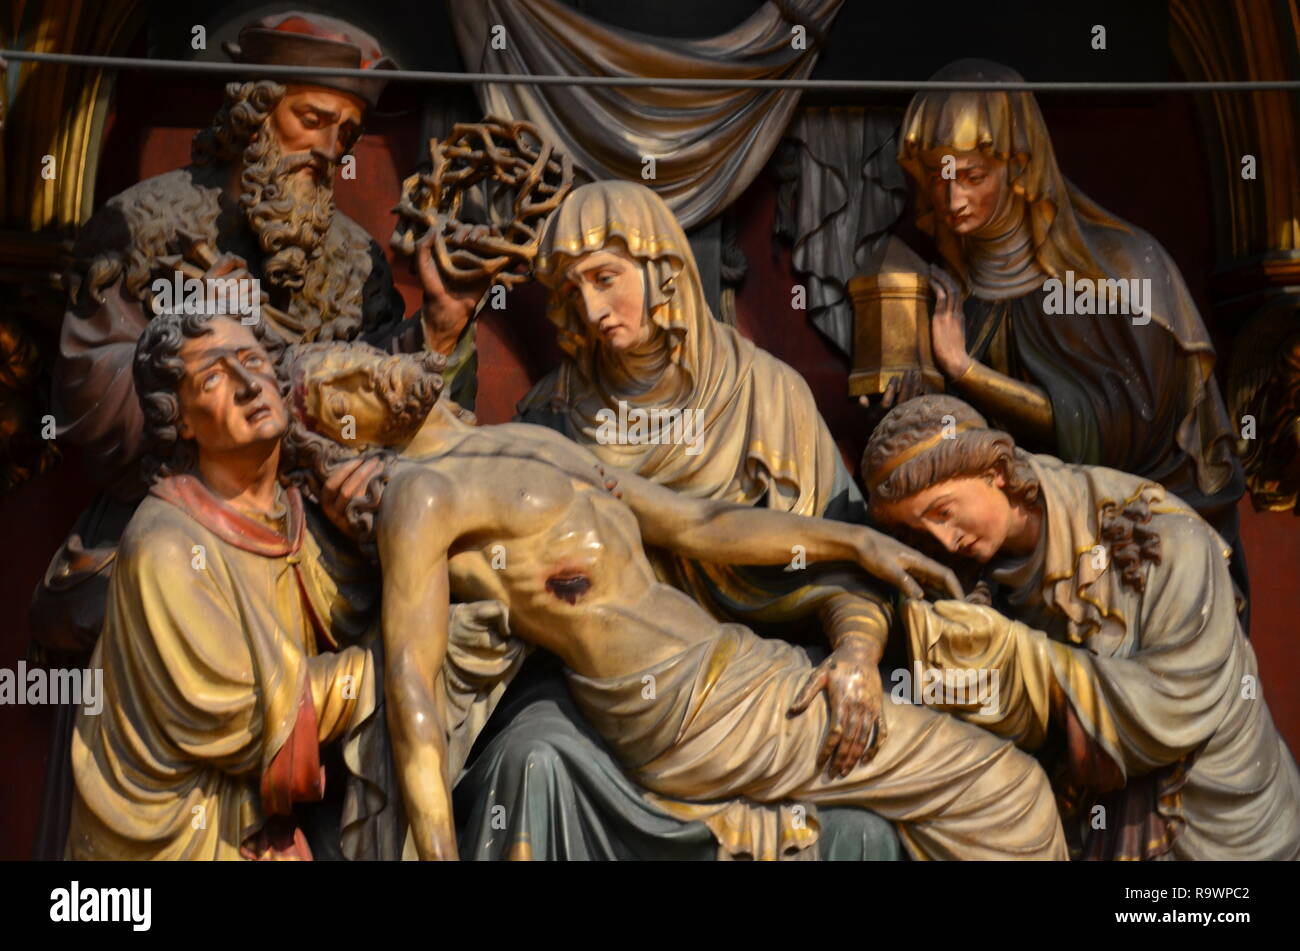 Jesus, Mary and disciples in a relief in Cologne dom church. Stock Photo